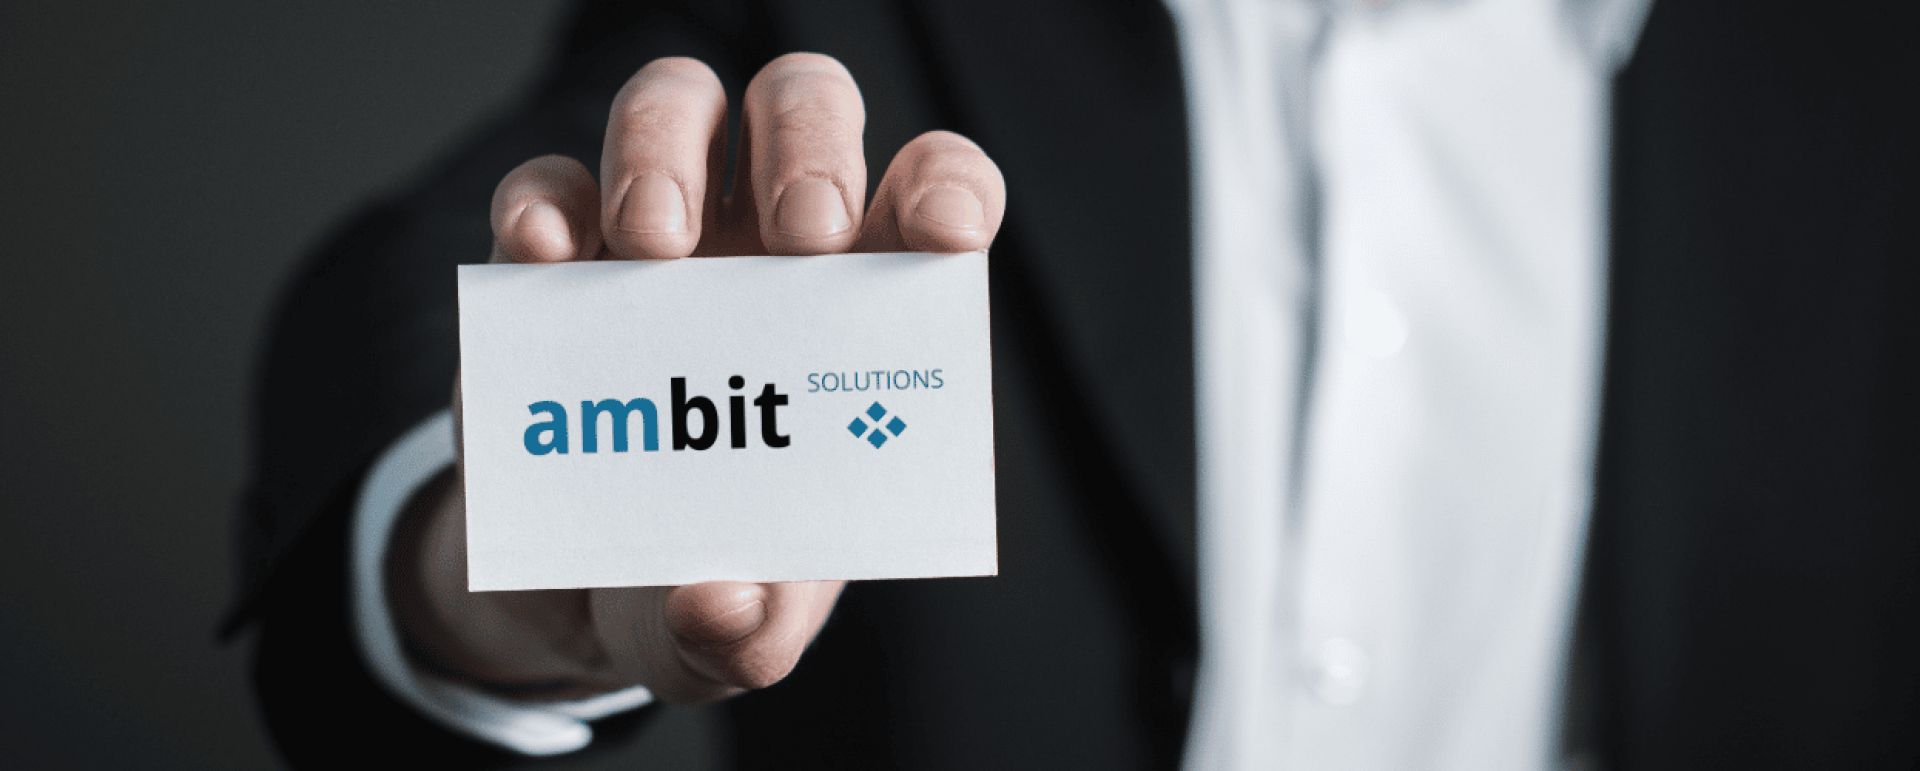 Ambit Business Card